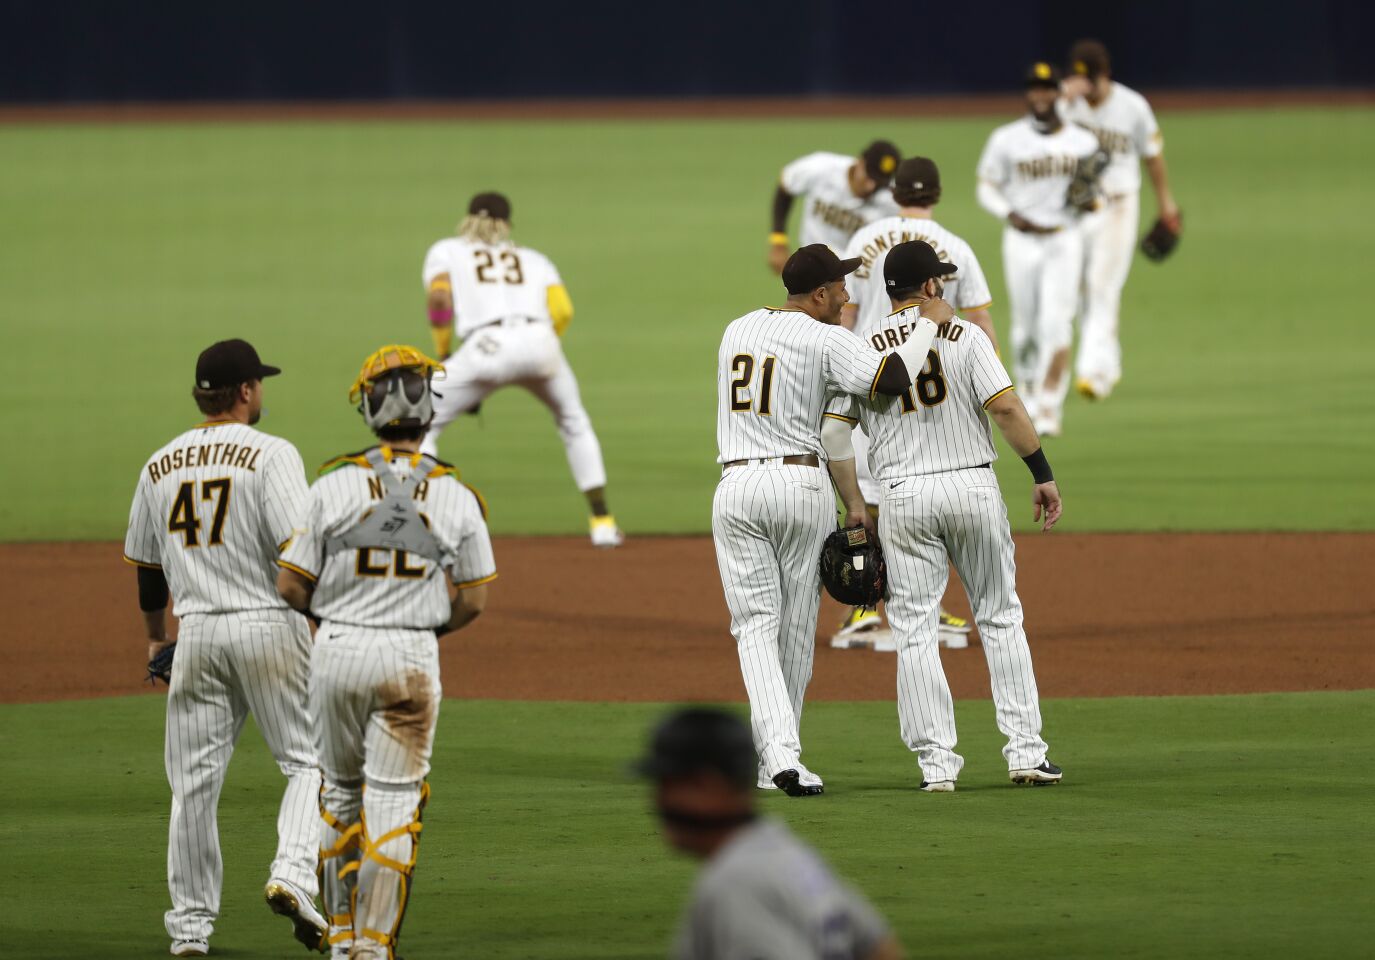 The San Diego Padres celebrate beating the Colorado Rockies 5-3 at Petco Park on Wednesday, Sept. 9, 2020.